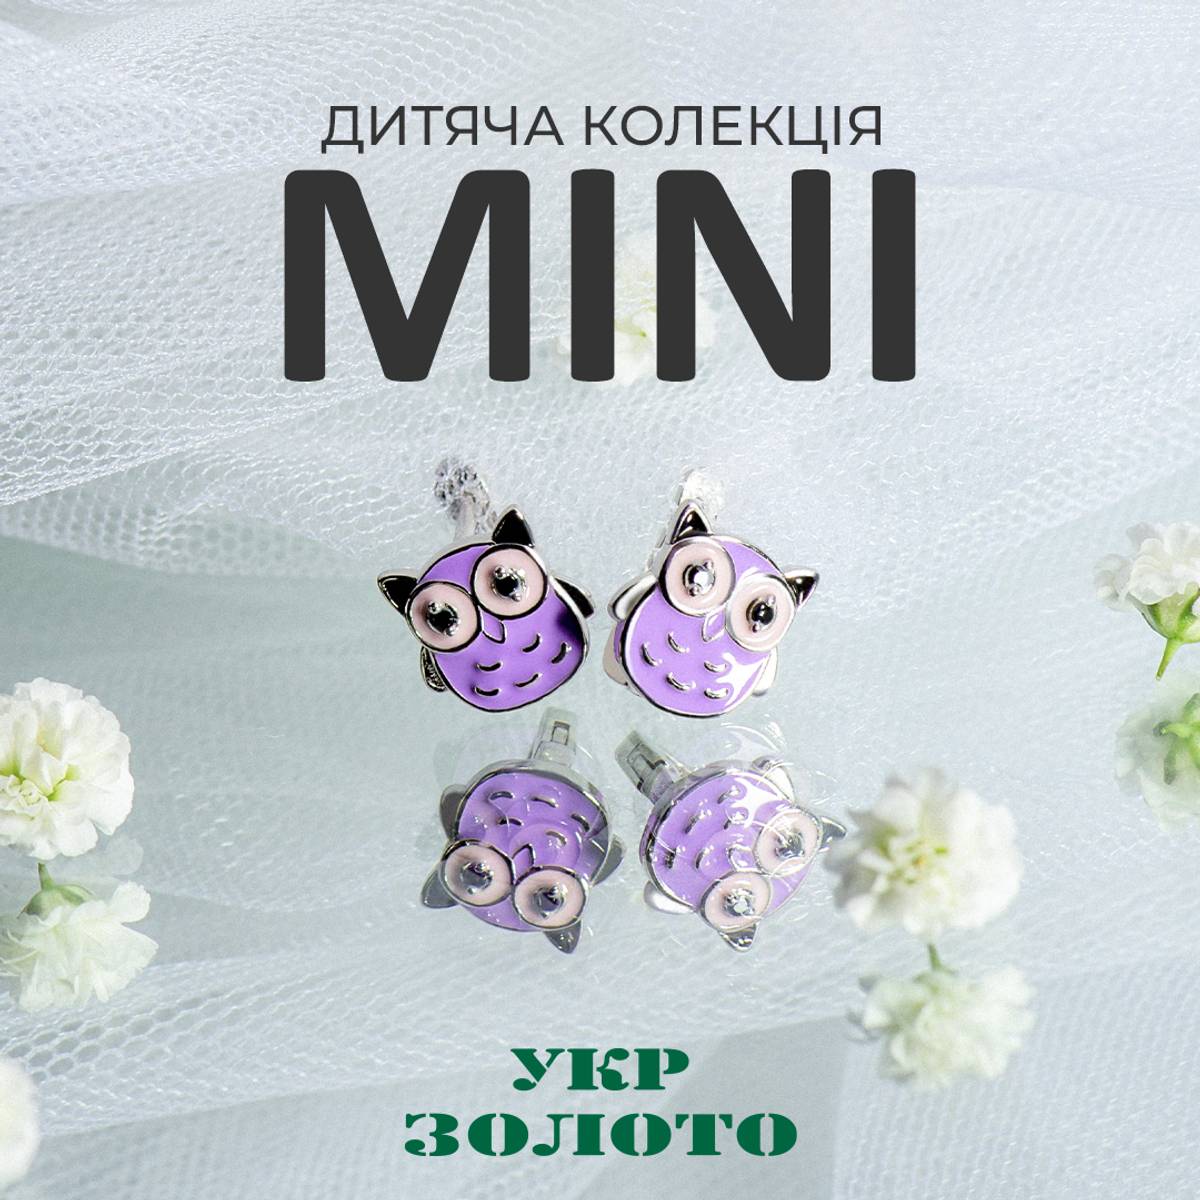 Gifts for children from "Ukrzoloto"!